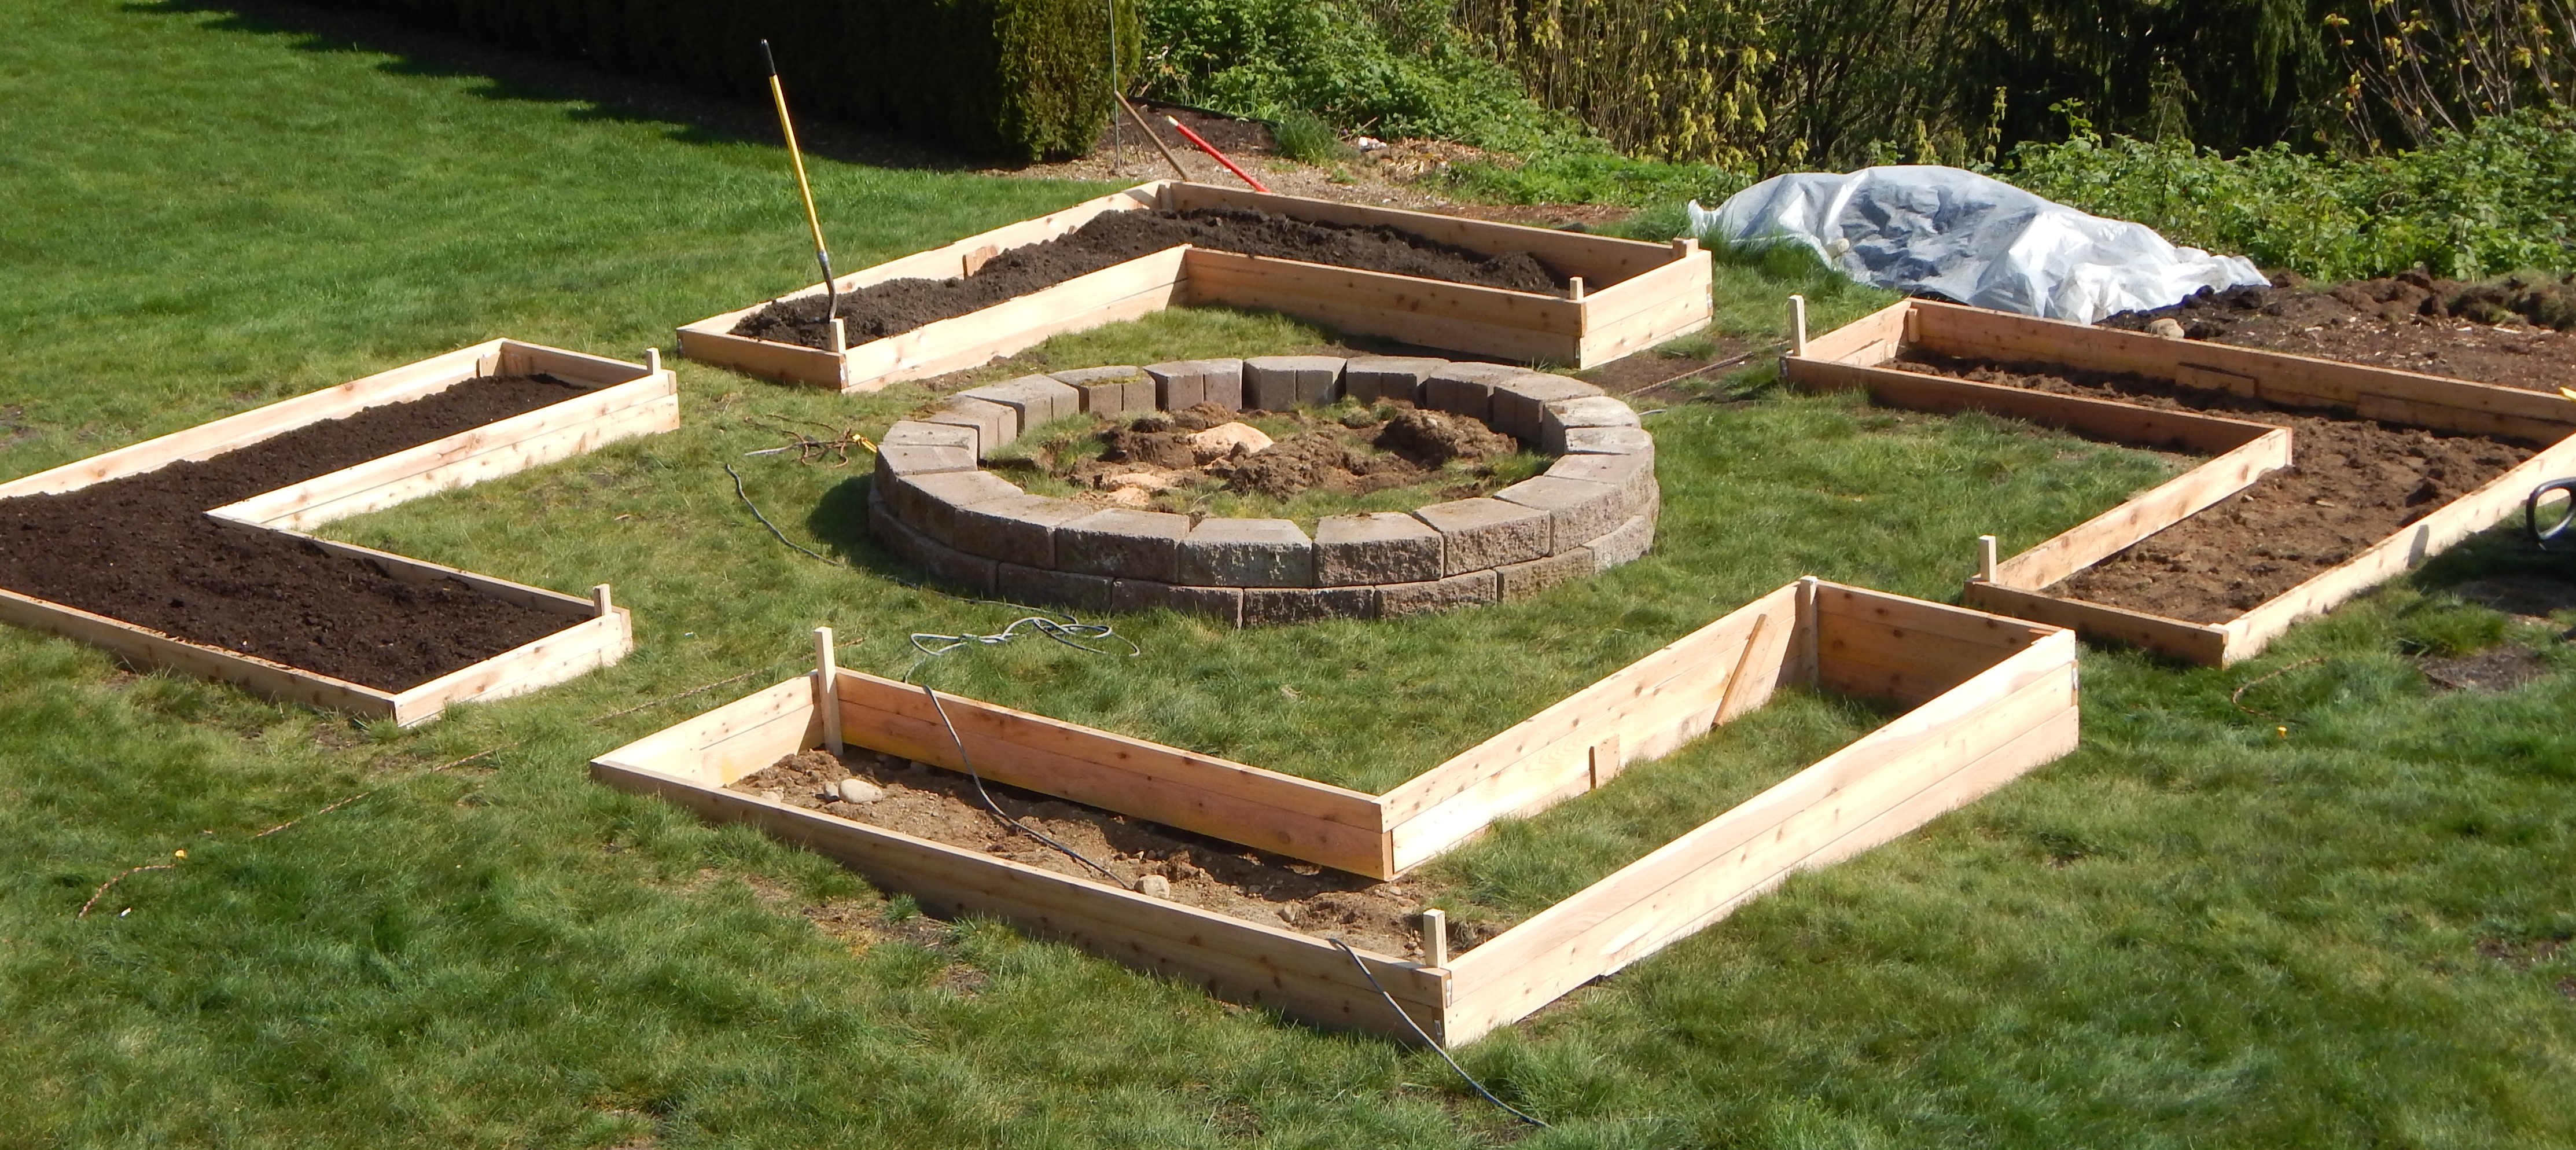 How To Raised Vegetable Beds